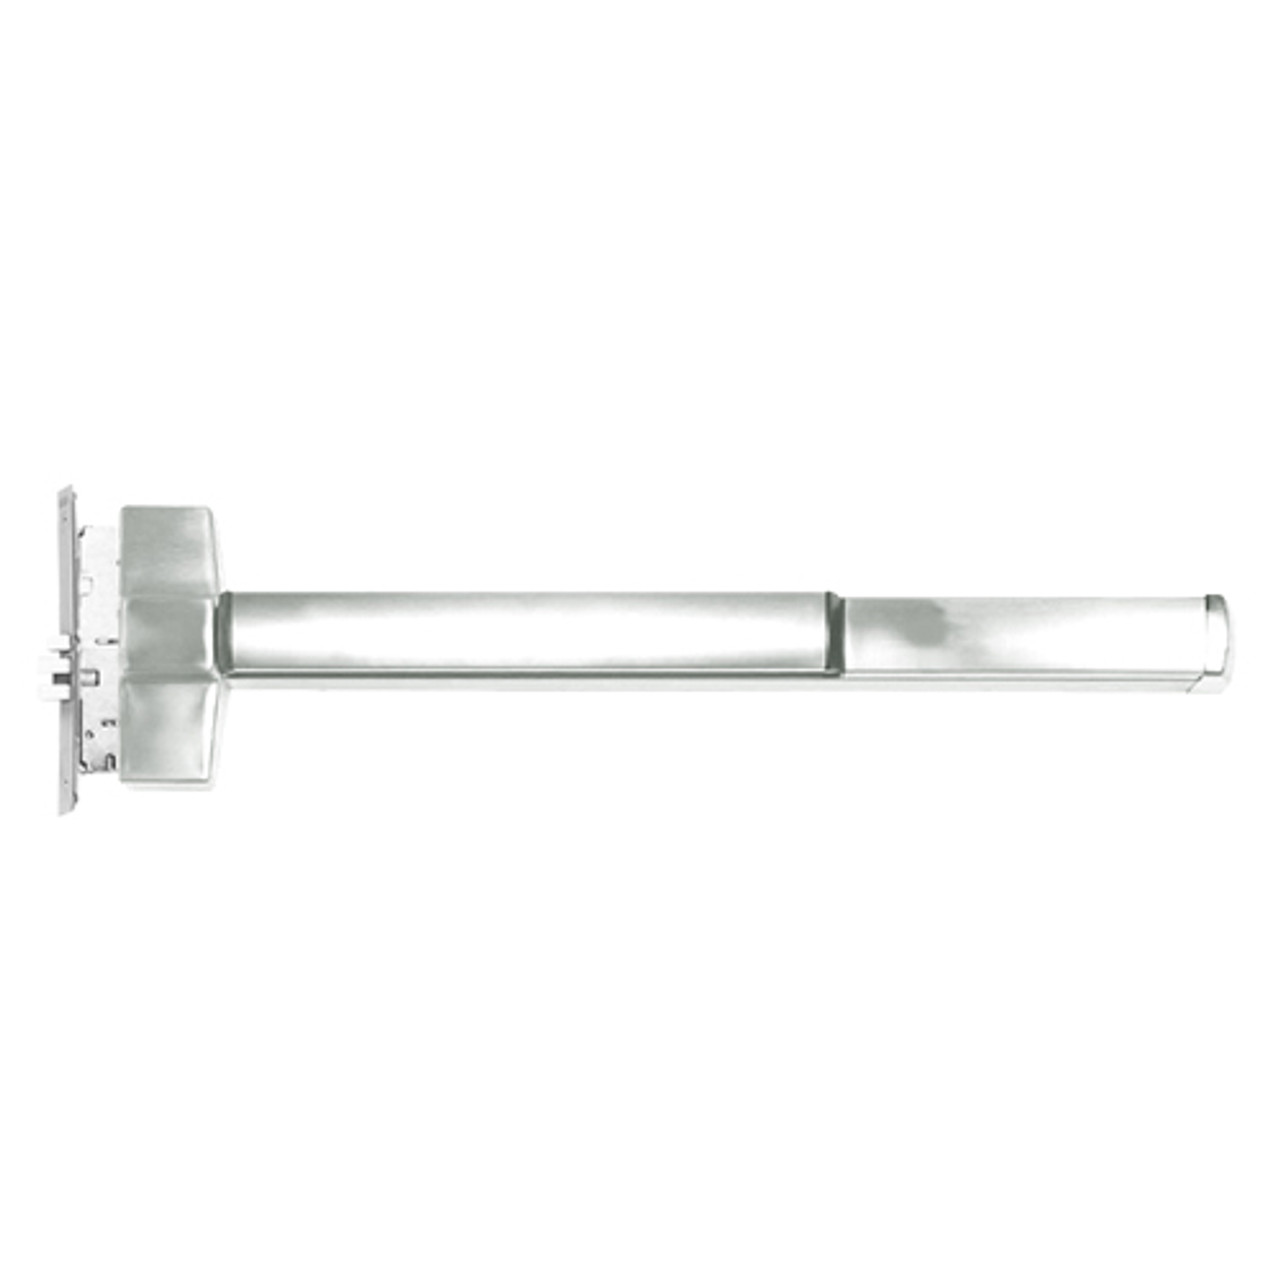 ED5600ALD-618-LHR Corbin ED5600 Series Fire Rated Mortise Exit Device with Delayed Egress in Bright Nickel Finish